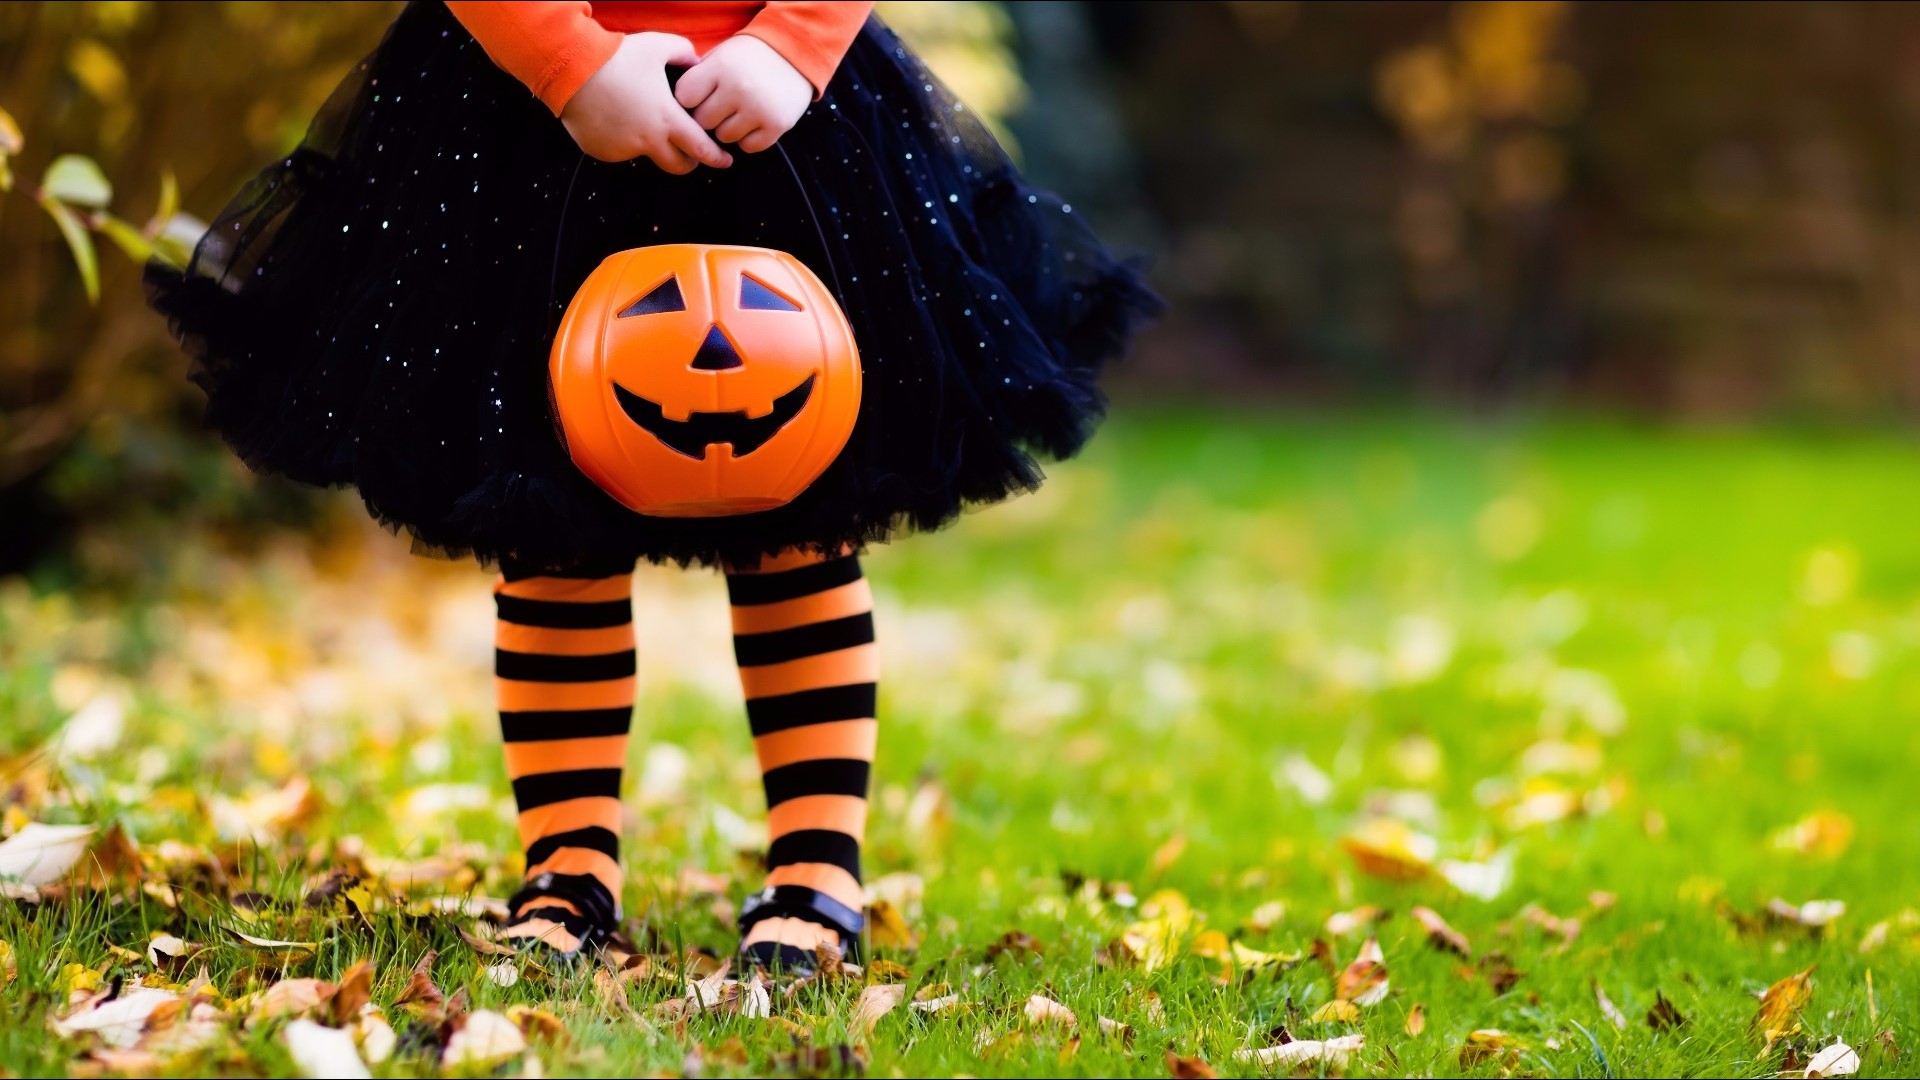 Kentucky Public Health Commissioner Dr. Steven Stack provided guidance for children and adults this Halloween.